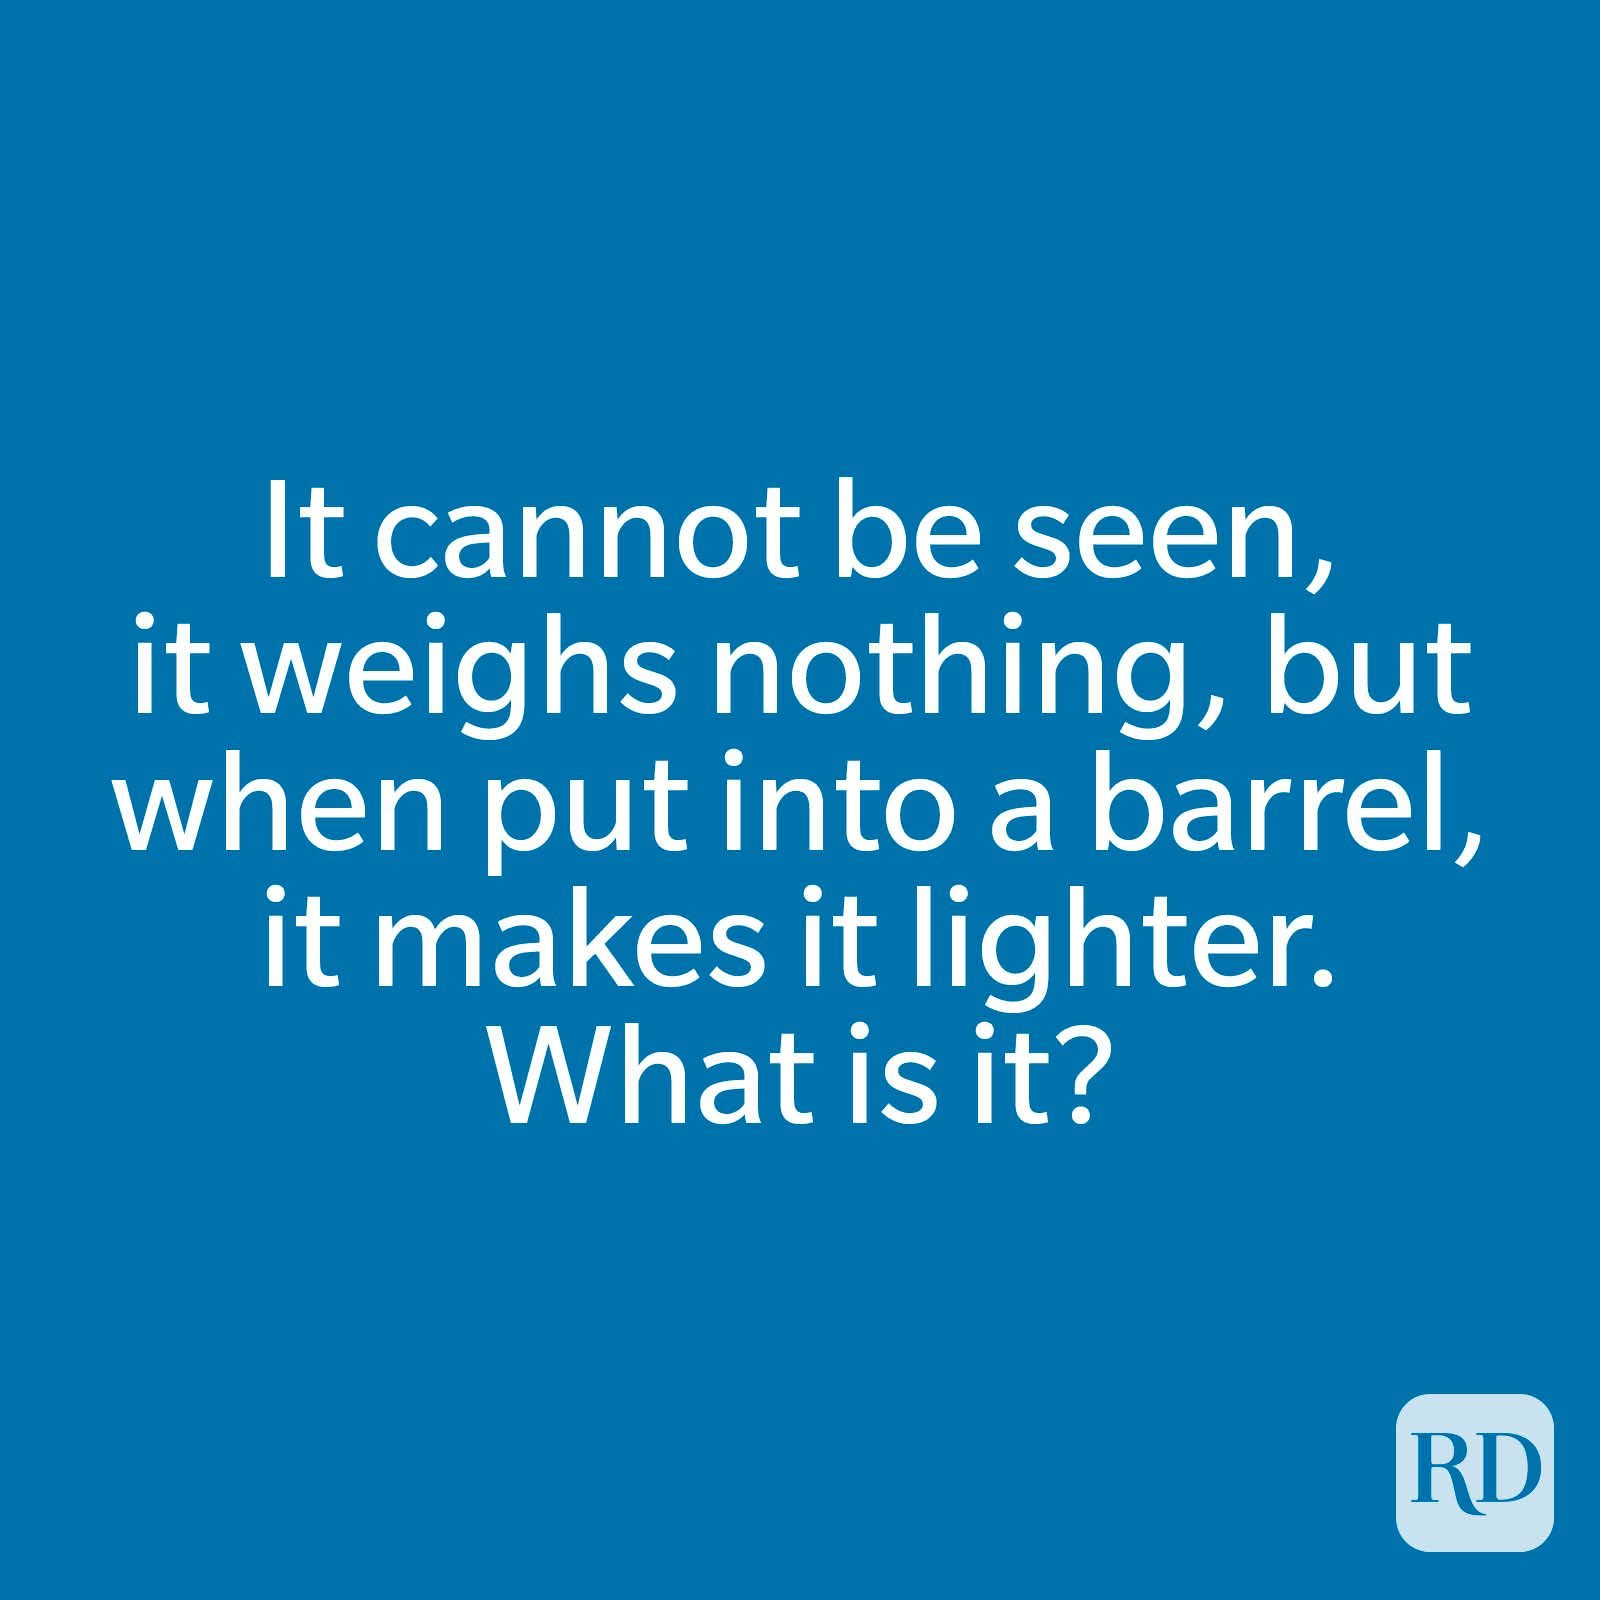 It cannot be seen, it weighs nothing, but when put into a barrel, it makes it lighter. What is it?